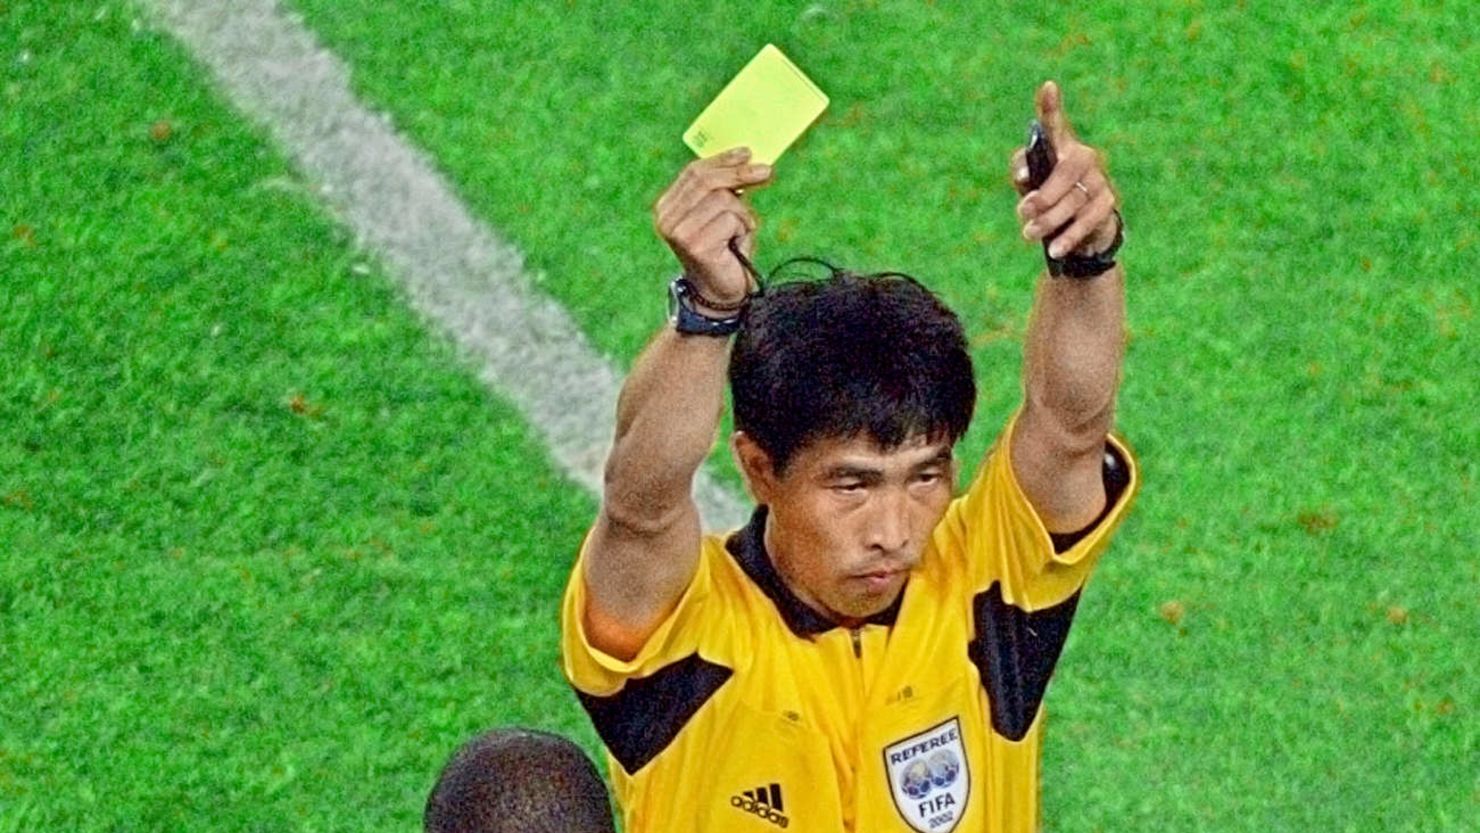 One of China's most famous soccer referees, Lu Jun, has been sent to jail for fixing matches.